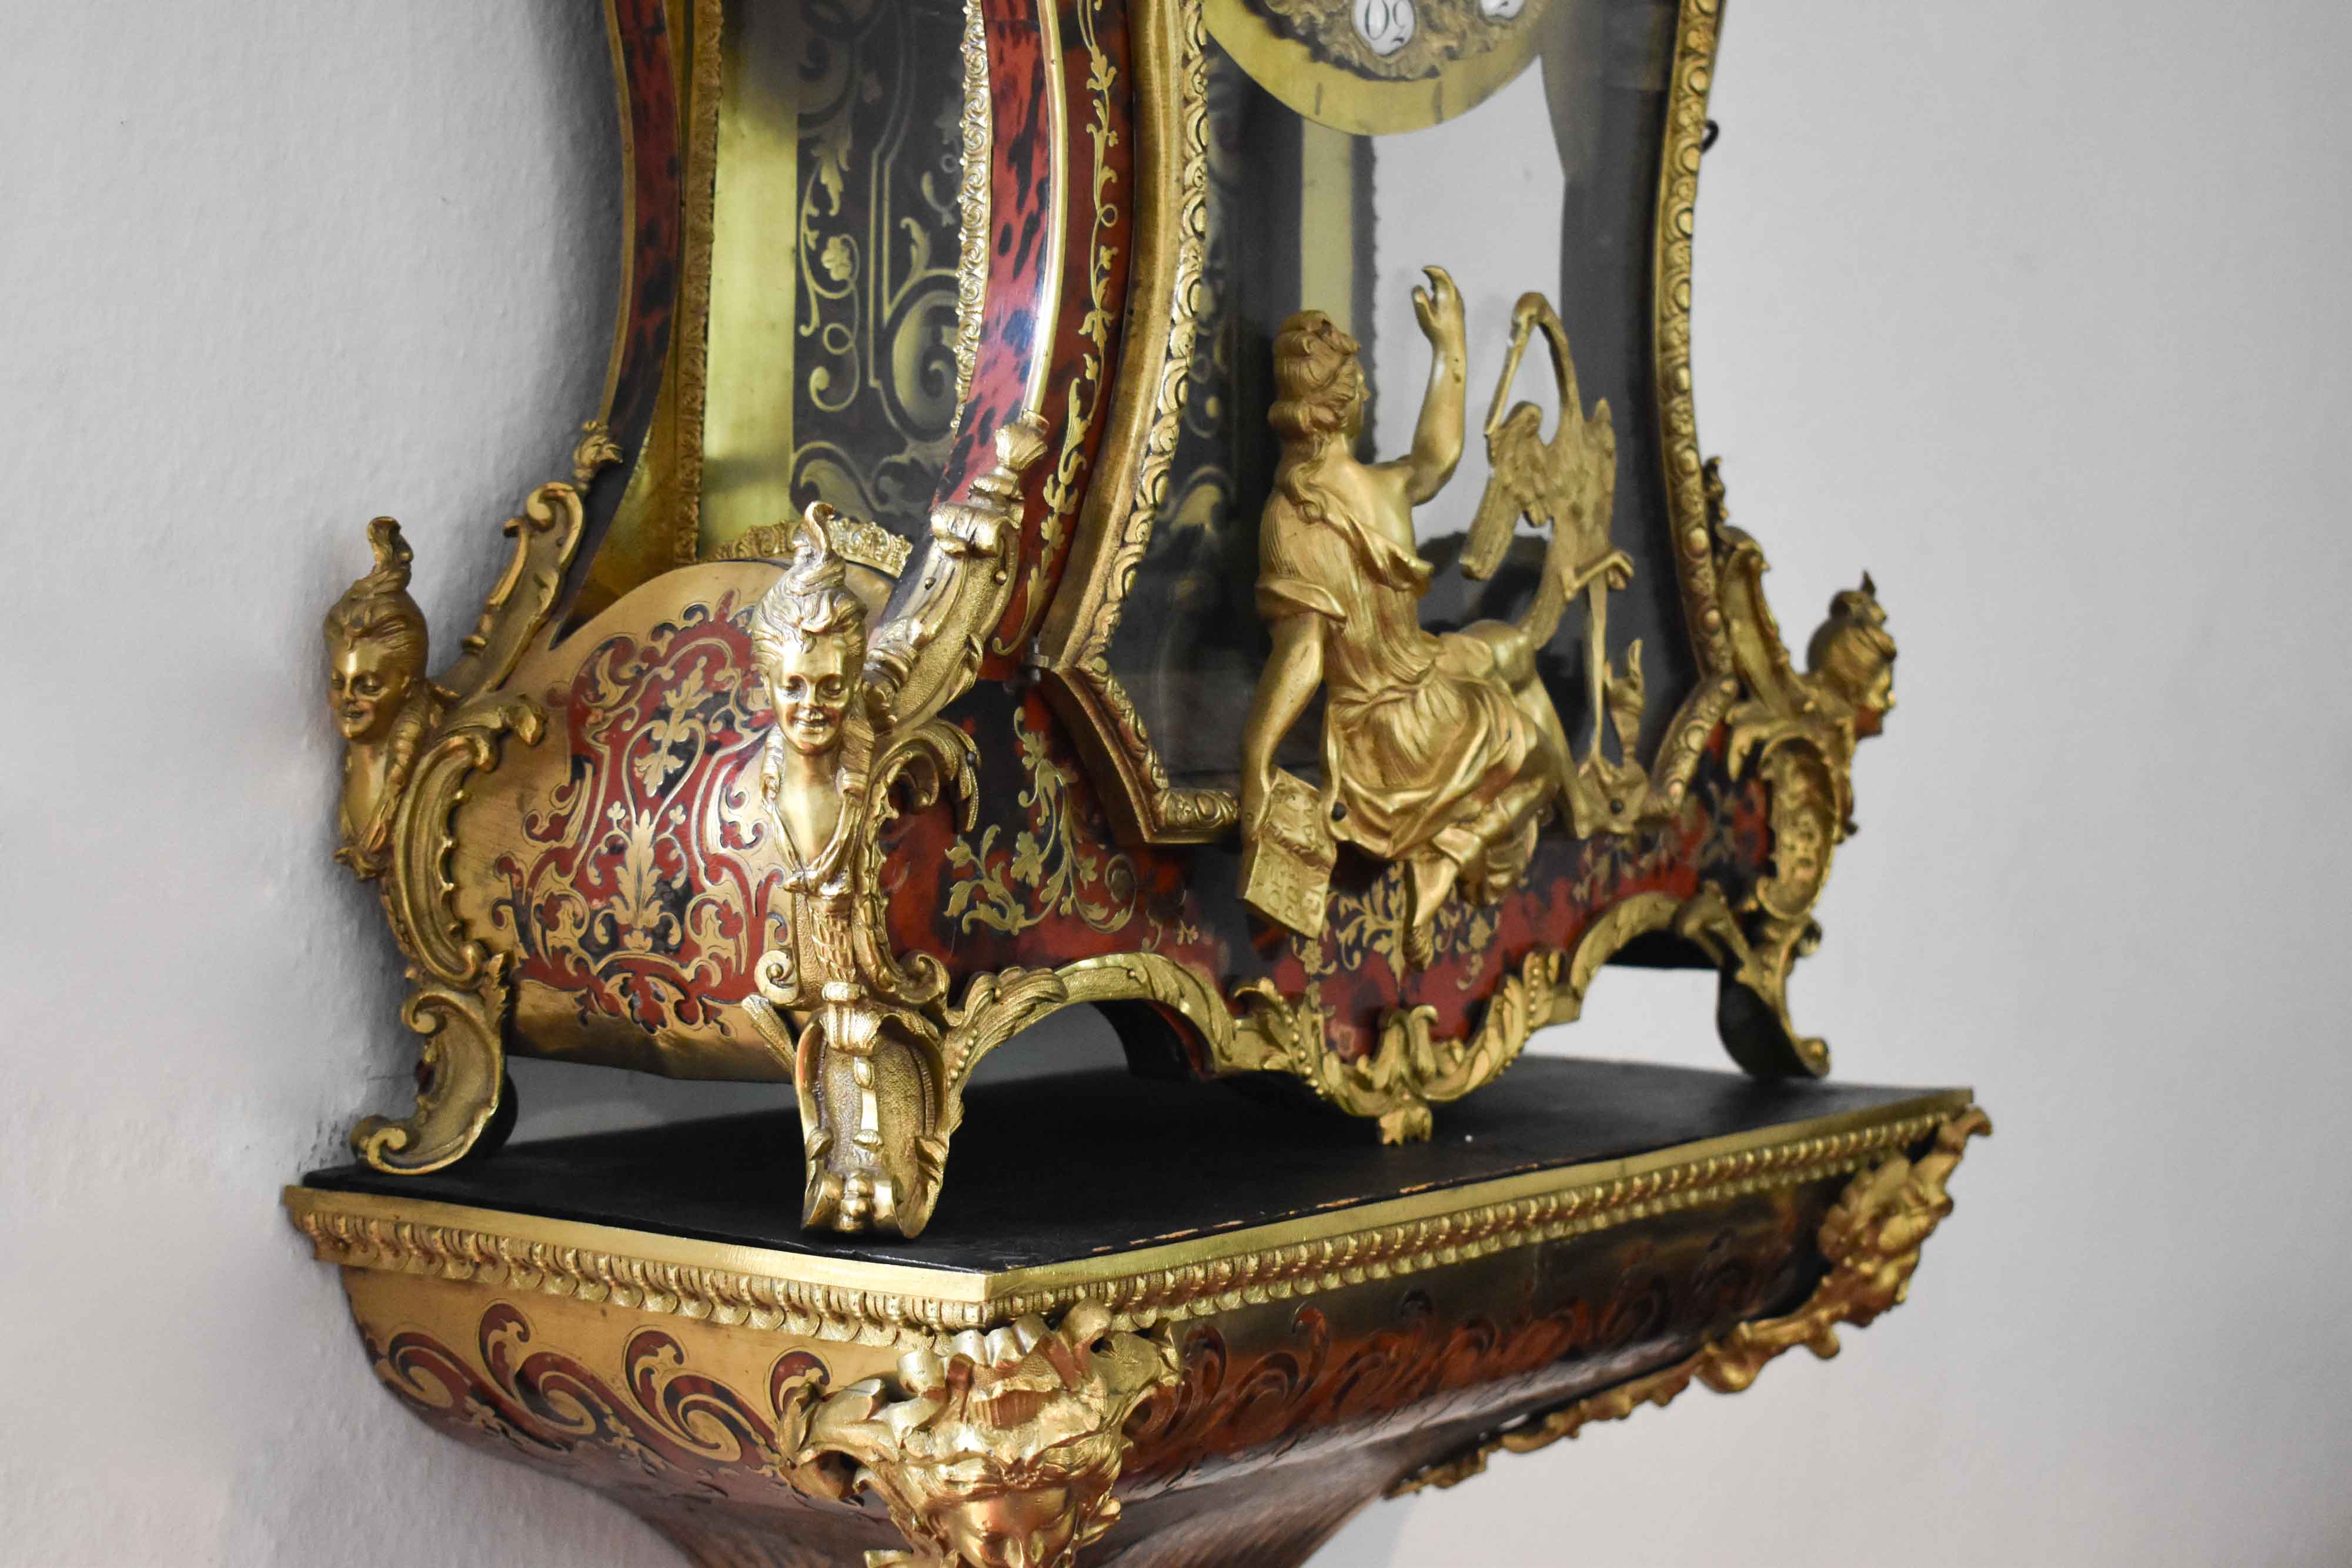 large imposing Boulle clock with console, Paris 18th century  - Image 2 of 6